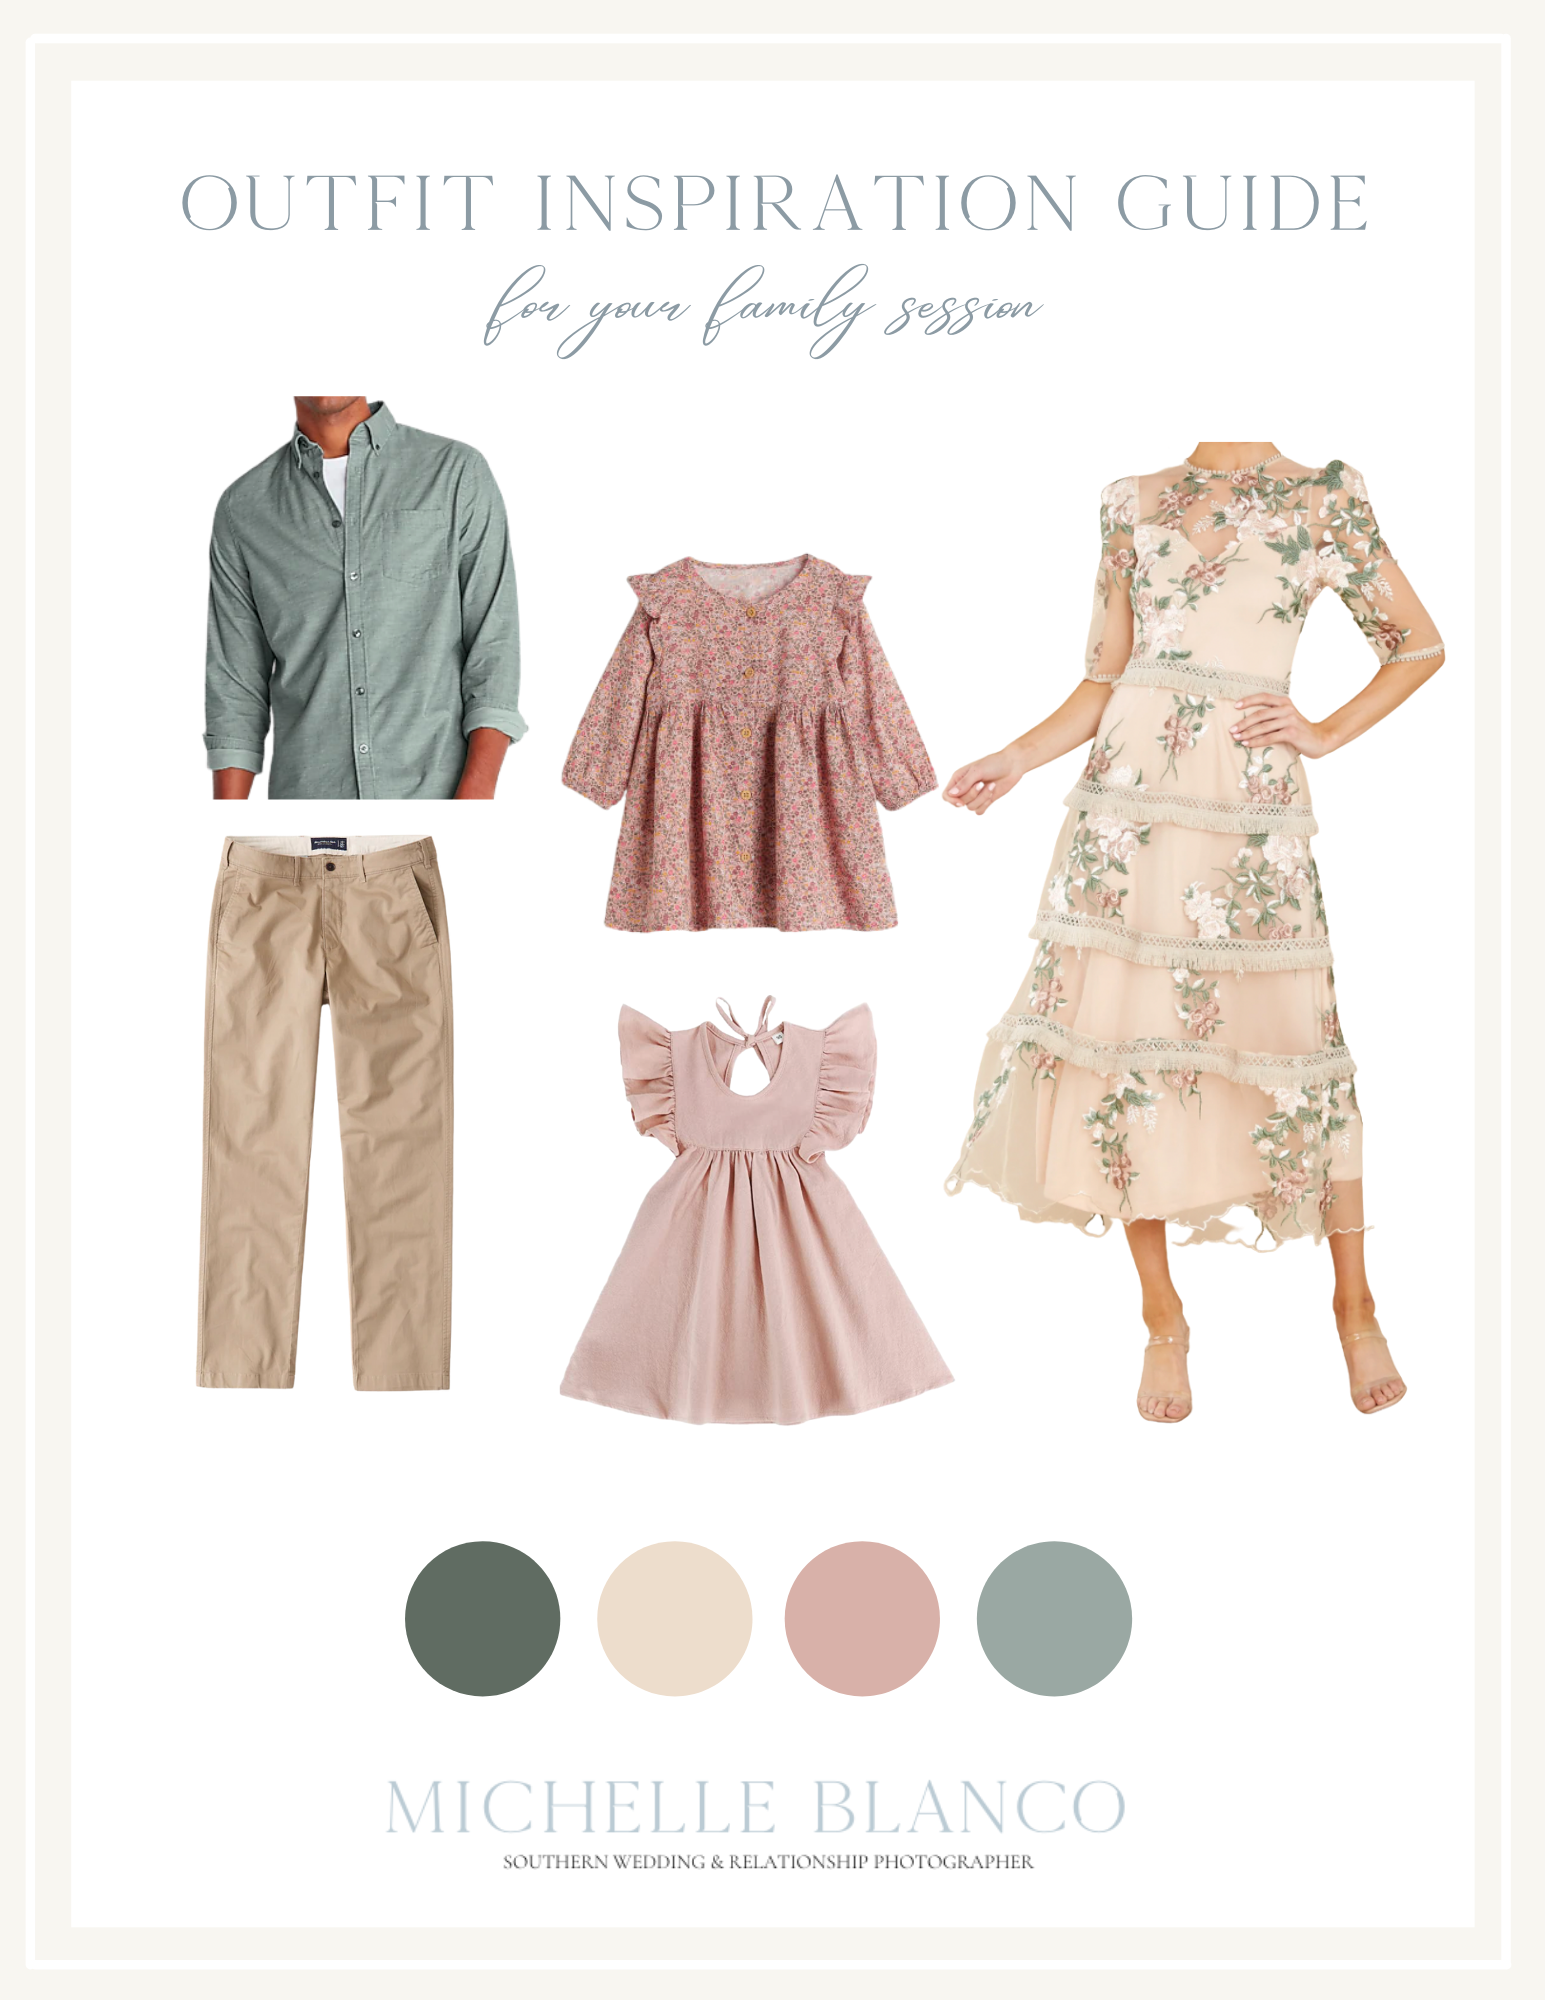 What to wear for spring family photos